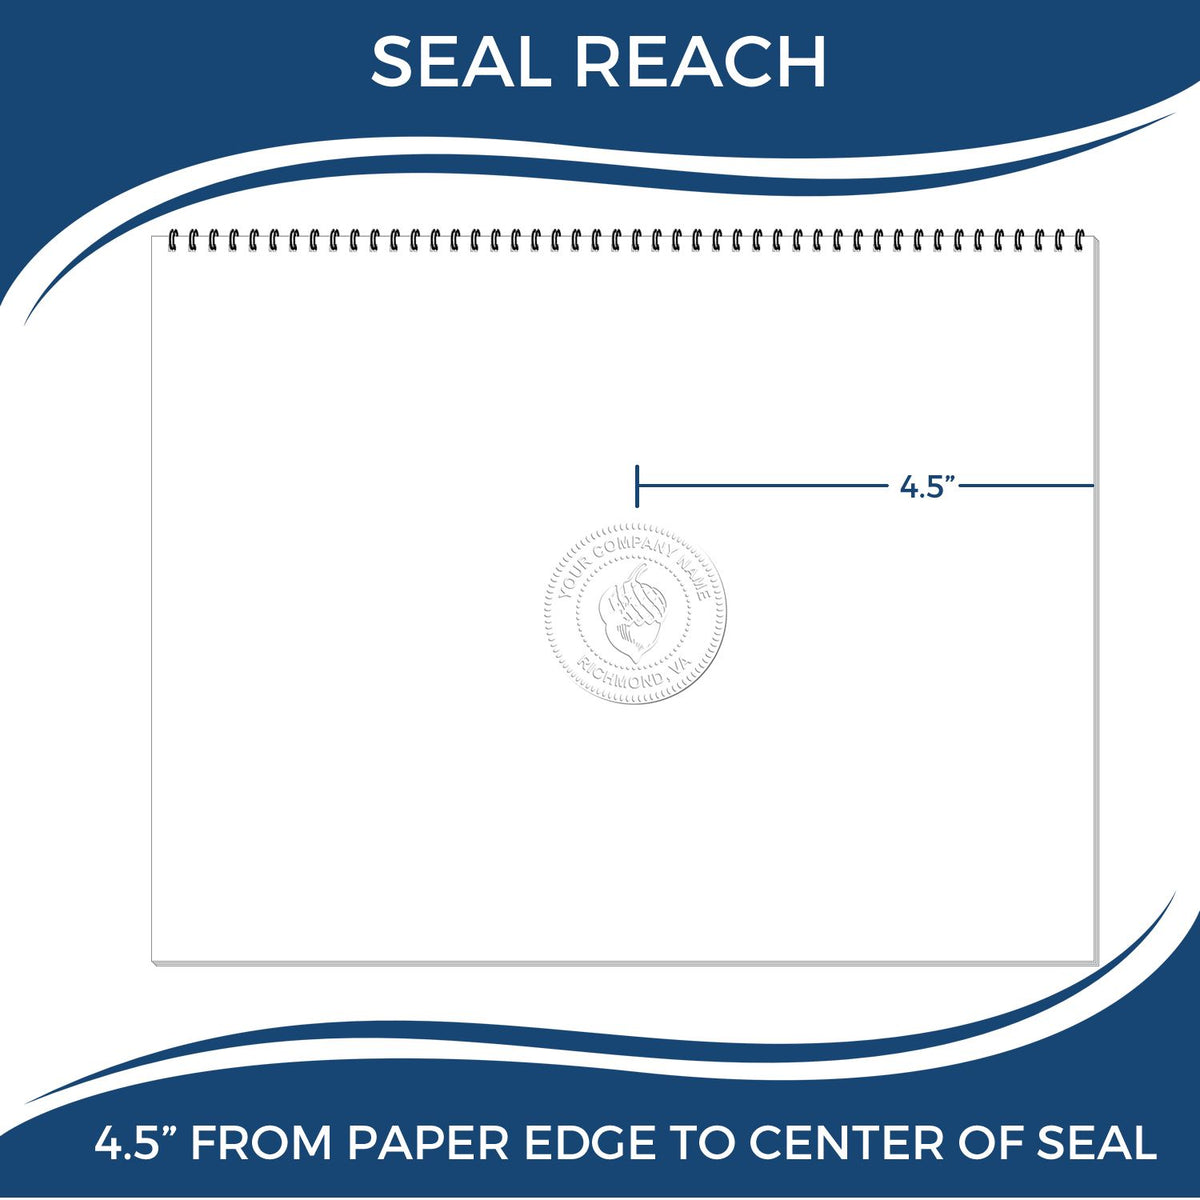 An infographic showing the seal reach which is represented by a ruler and a miniature seal image of the State of Connecticut Extended Long Reach Engineer Seal